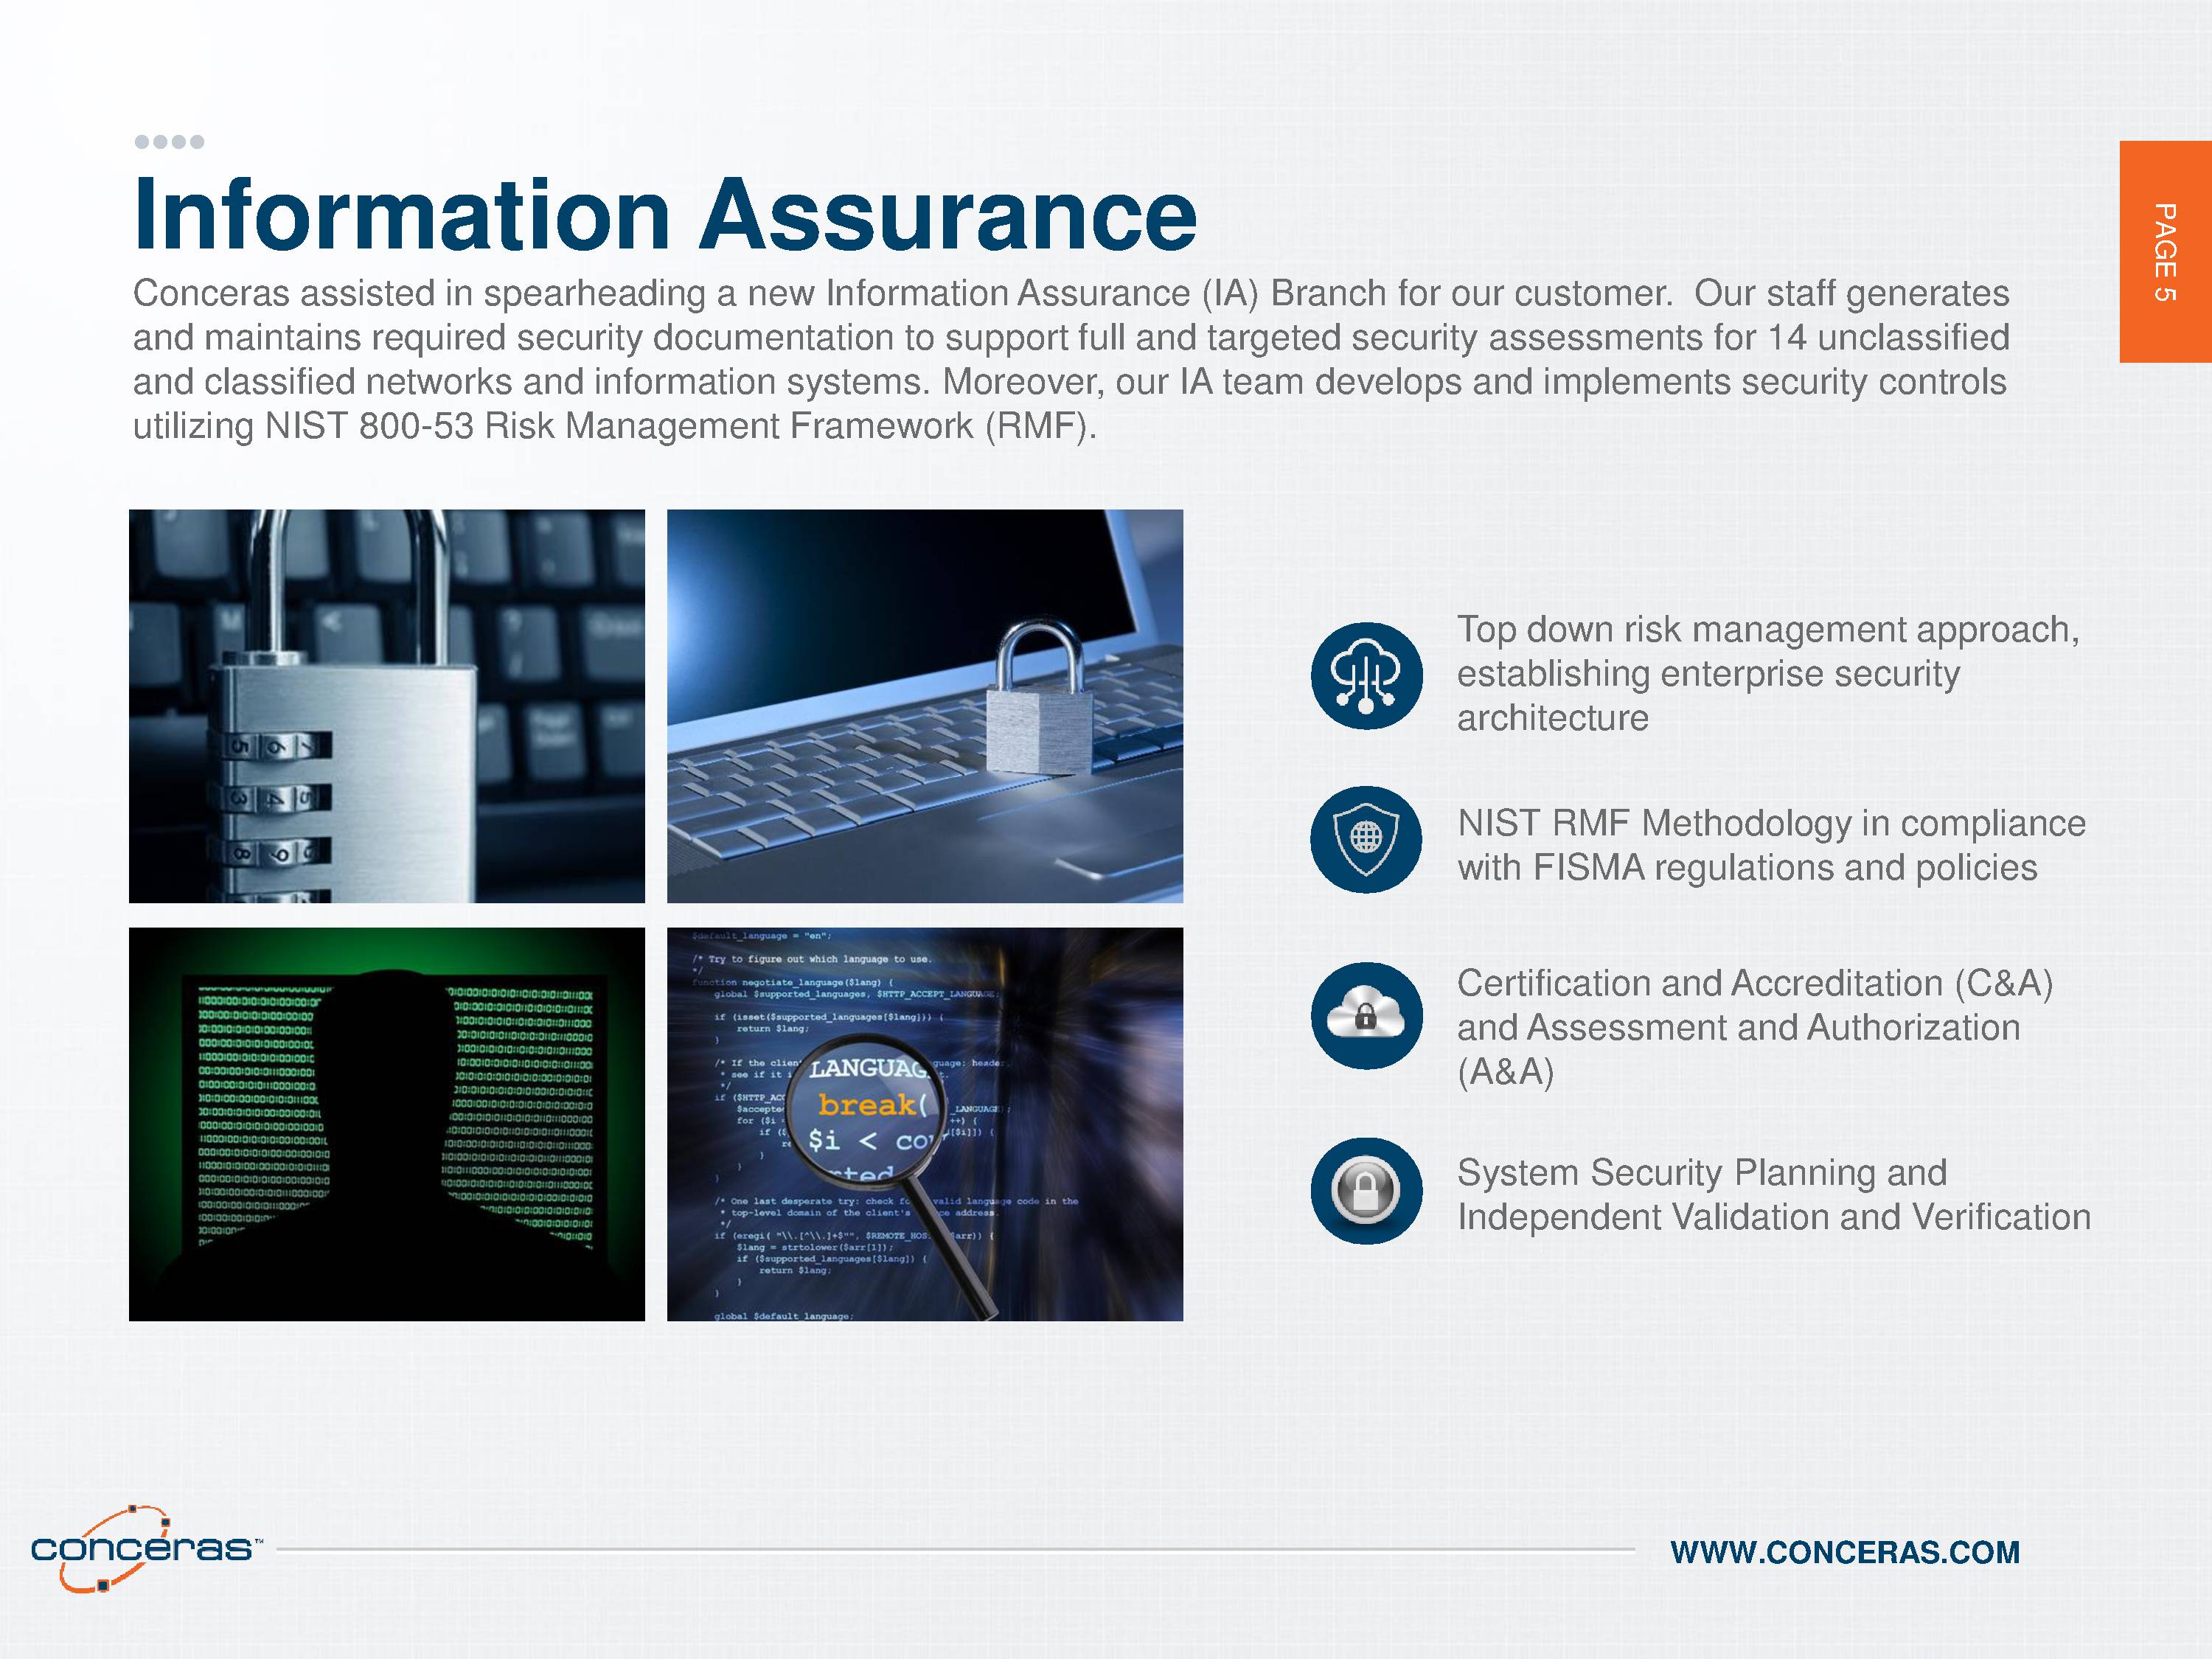 Infographic of Information Assurance